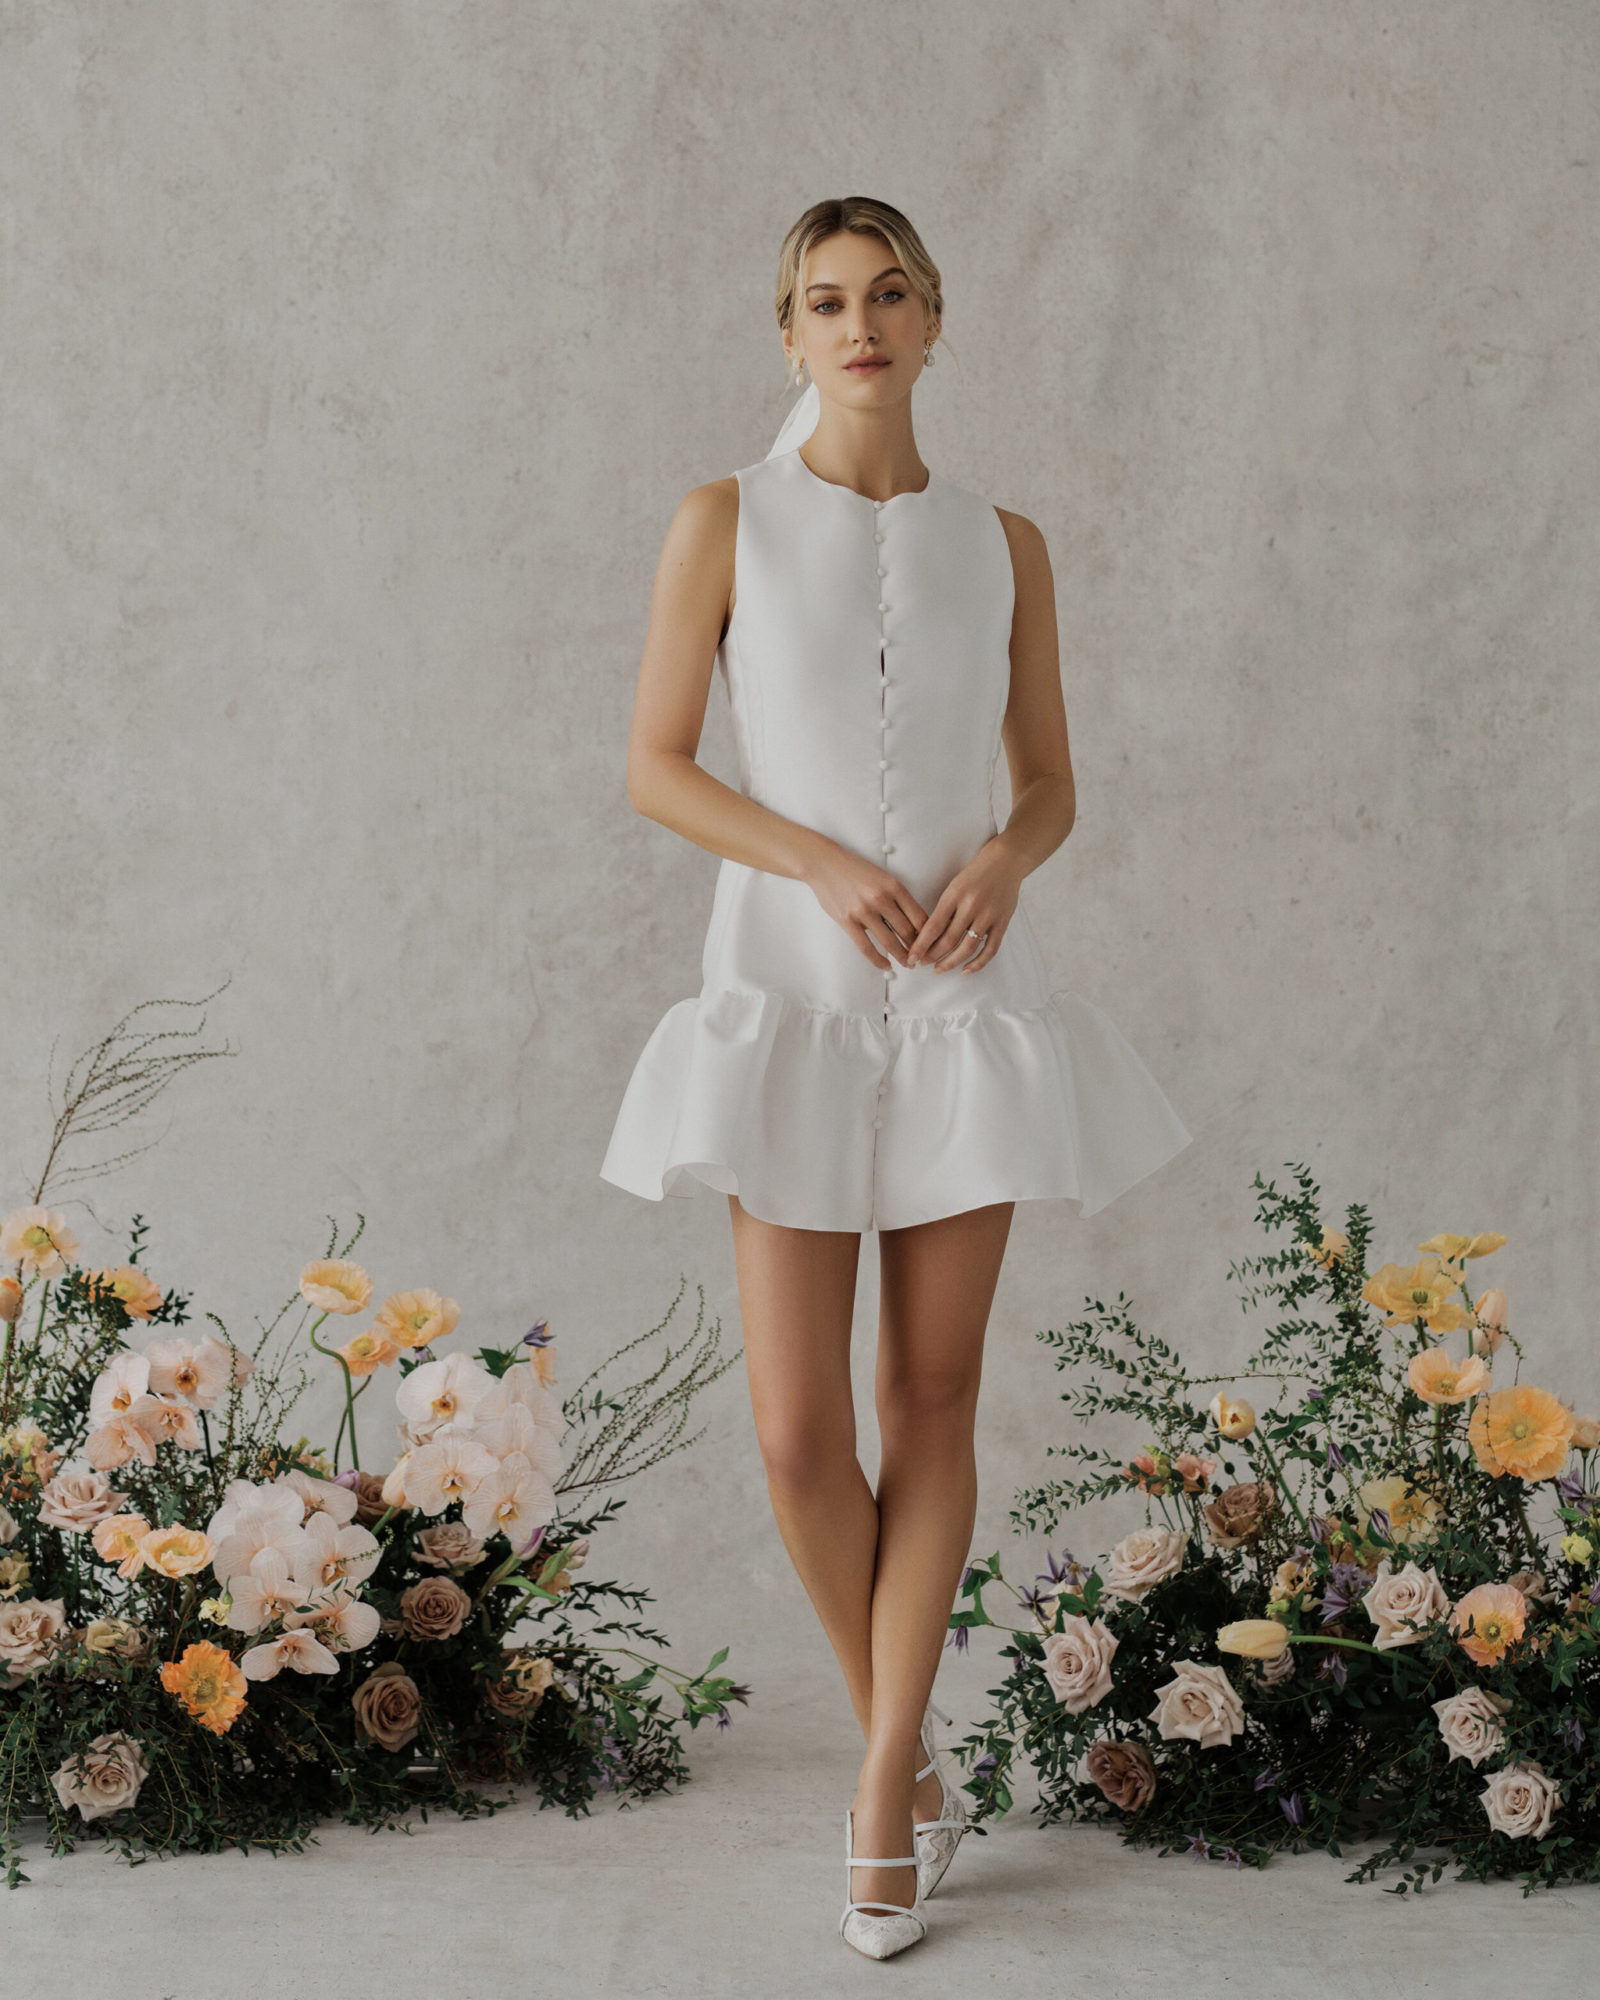 30 Little White Dresses Perfect for Your Civil Ceremony, or any other Pre-Wedding Event!